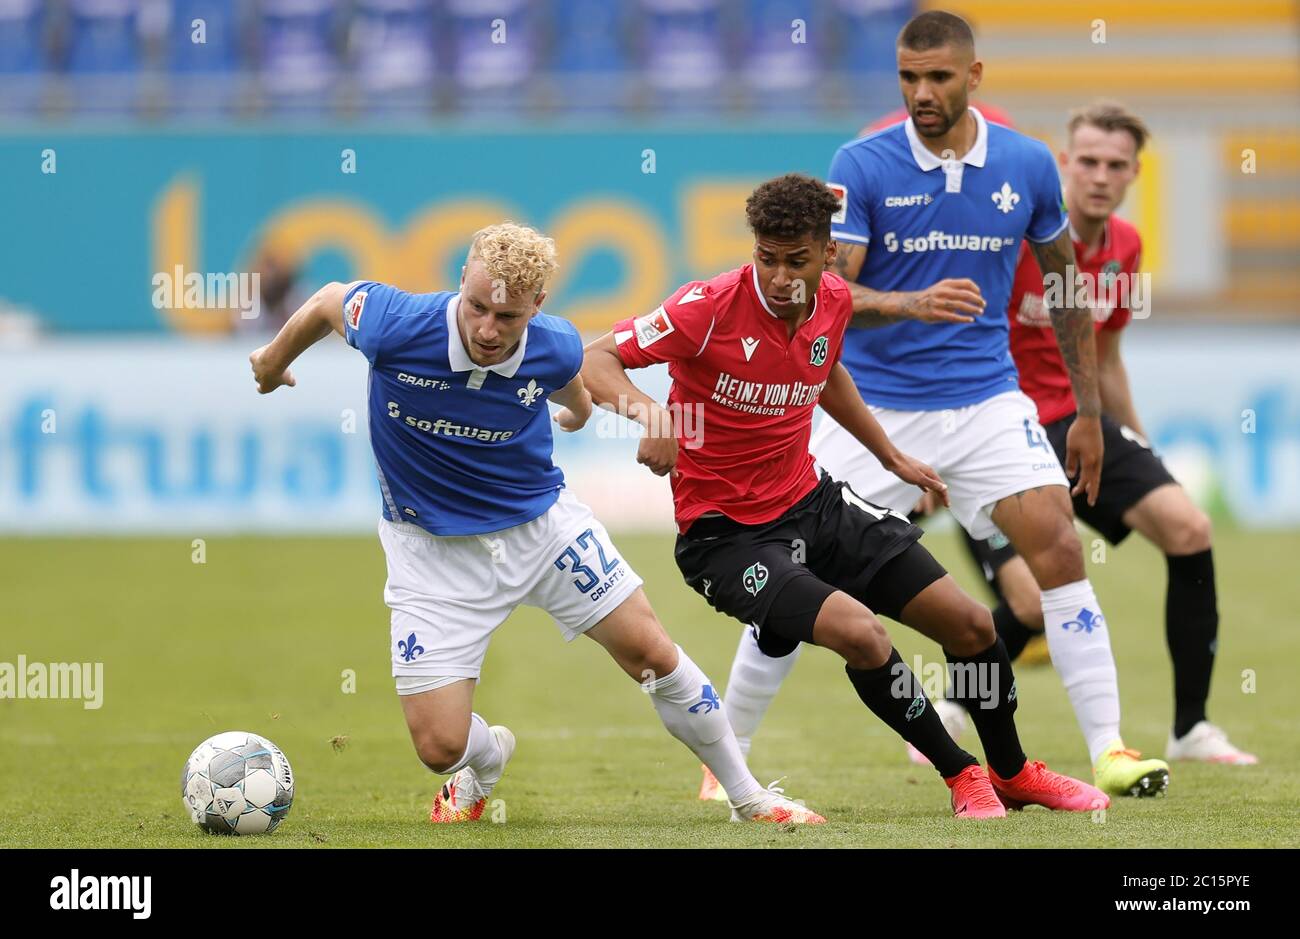 Darmstadt, Germany. 14th June, 2020. Football: 2nd Bundesliga, SV Darmstadt 98 - Hannover 96, 31st day of play in the Merck Stadium at the Böllenfalltor. Darmstadt's Fabian Holland (l) battles for the ball with Hannover's Linton Maina (2nd from left). Credit: Ronald Wittek/epa Pool/dpa - IMPORTANT NOTE: In accordance with the regulations of the DFL Deutsche Fußball Liga and the DFB Deutscher Fußball-Bund, it is prohibited to exploit or have exploited in the stadium and/or from the game taken photographs in the form of sequence images and/or video-like photo series./dpa/Alamy Live News Stock Photo